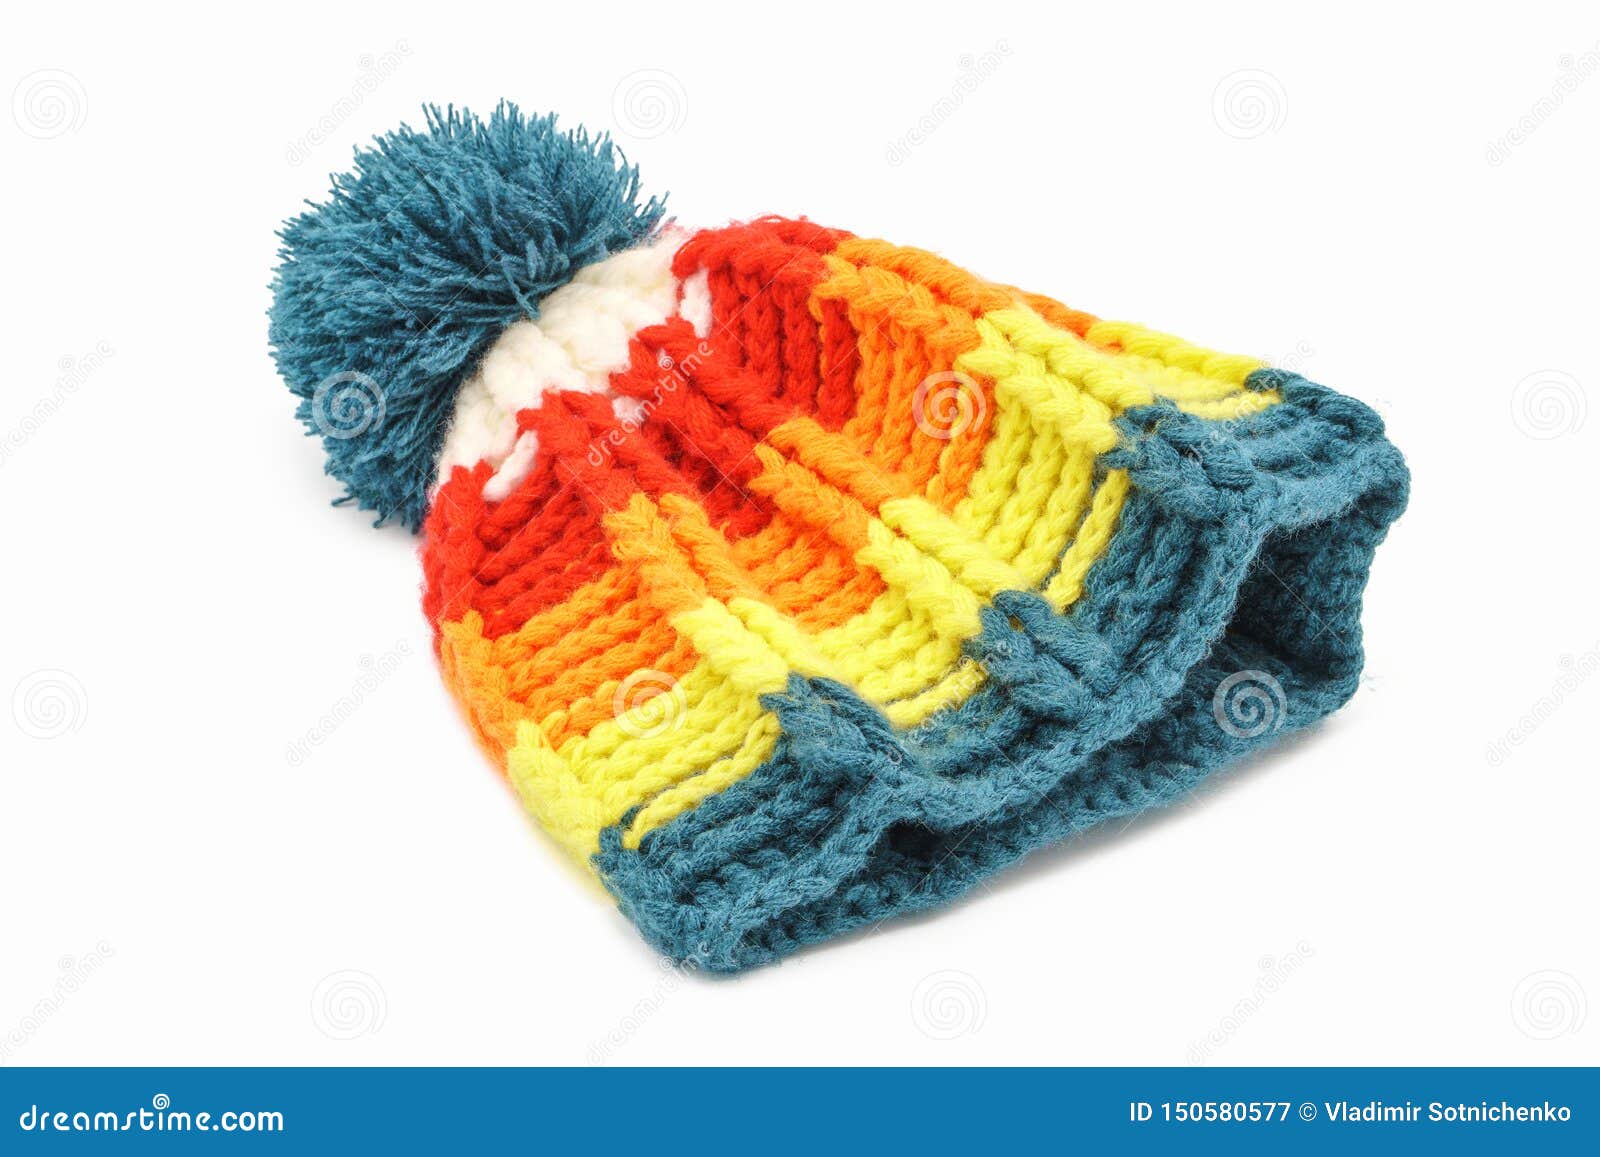 Colorful Winter Knitted Hat on a White Background Stock Image - Image ...